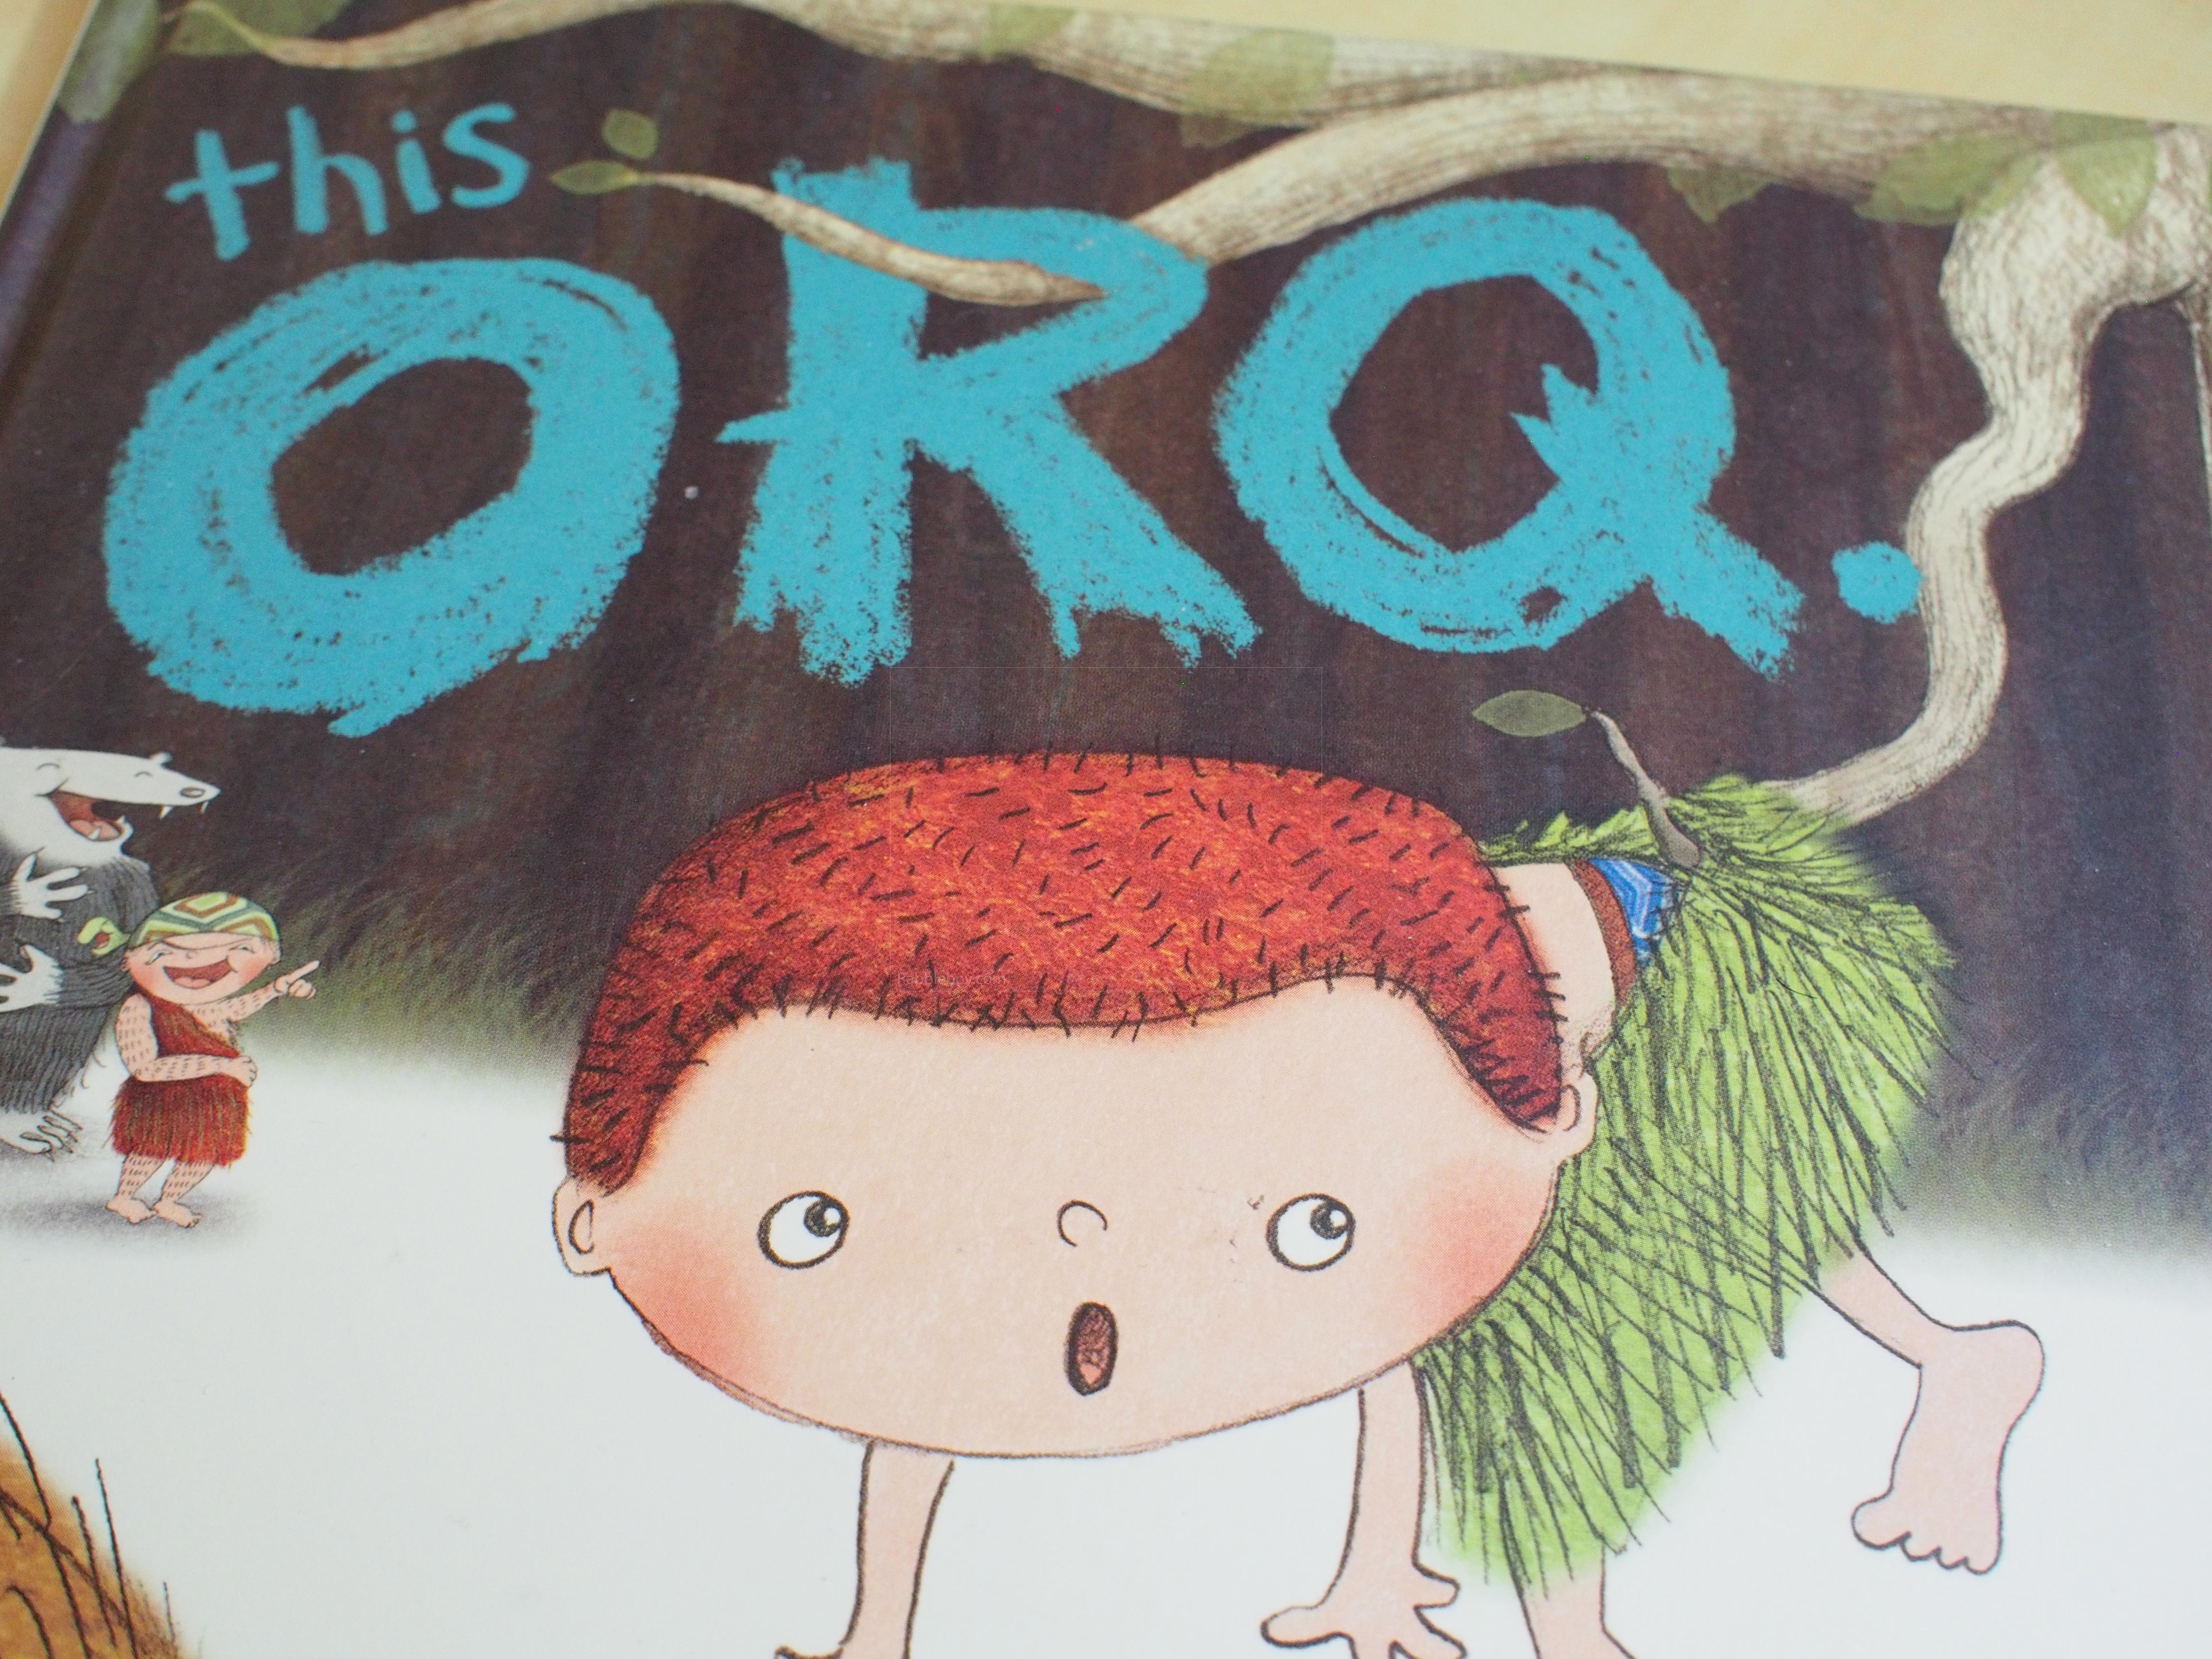 Picture Book Study: This Orq. (He Cave Boy.) by David Elliott and Lori Nichols